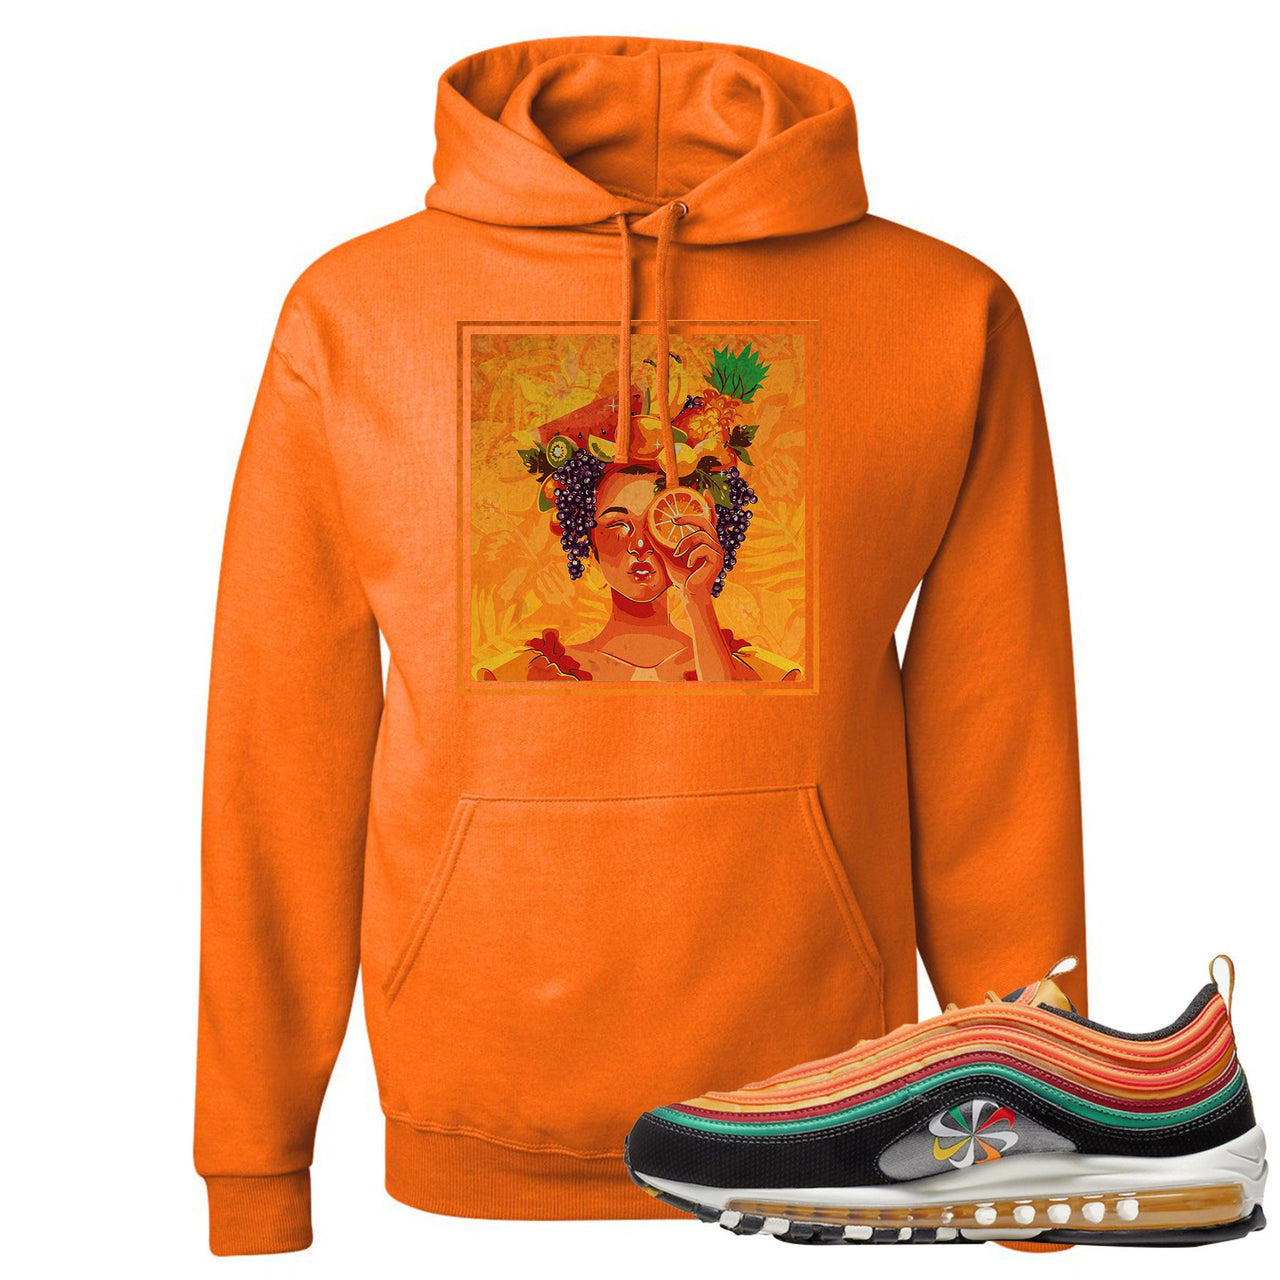 Printed on the front of the Air Max 97 Sunburst safety orange sneaker matching pullover hoodie is the Lady Fruit logo